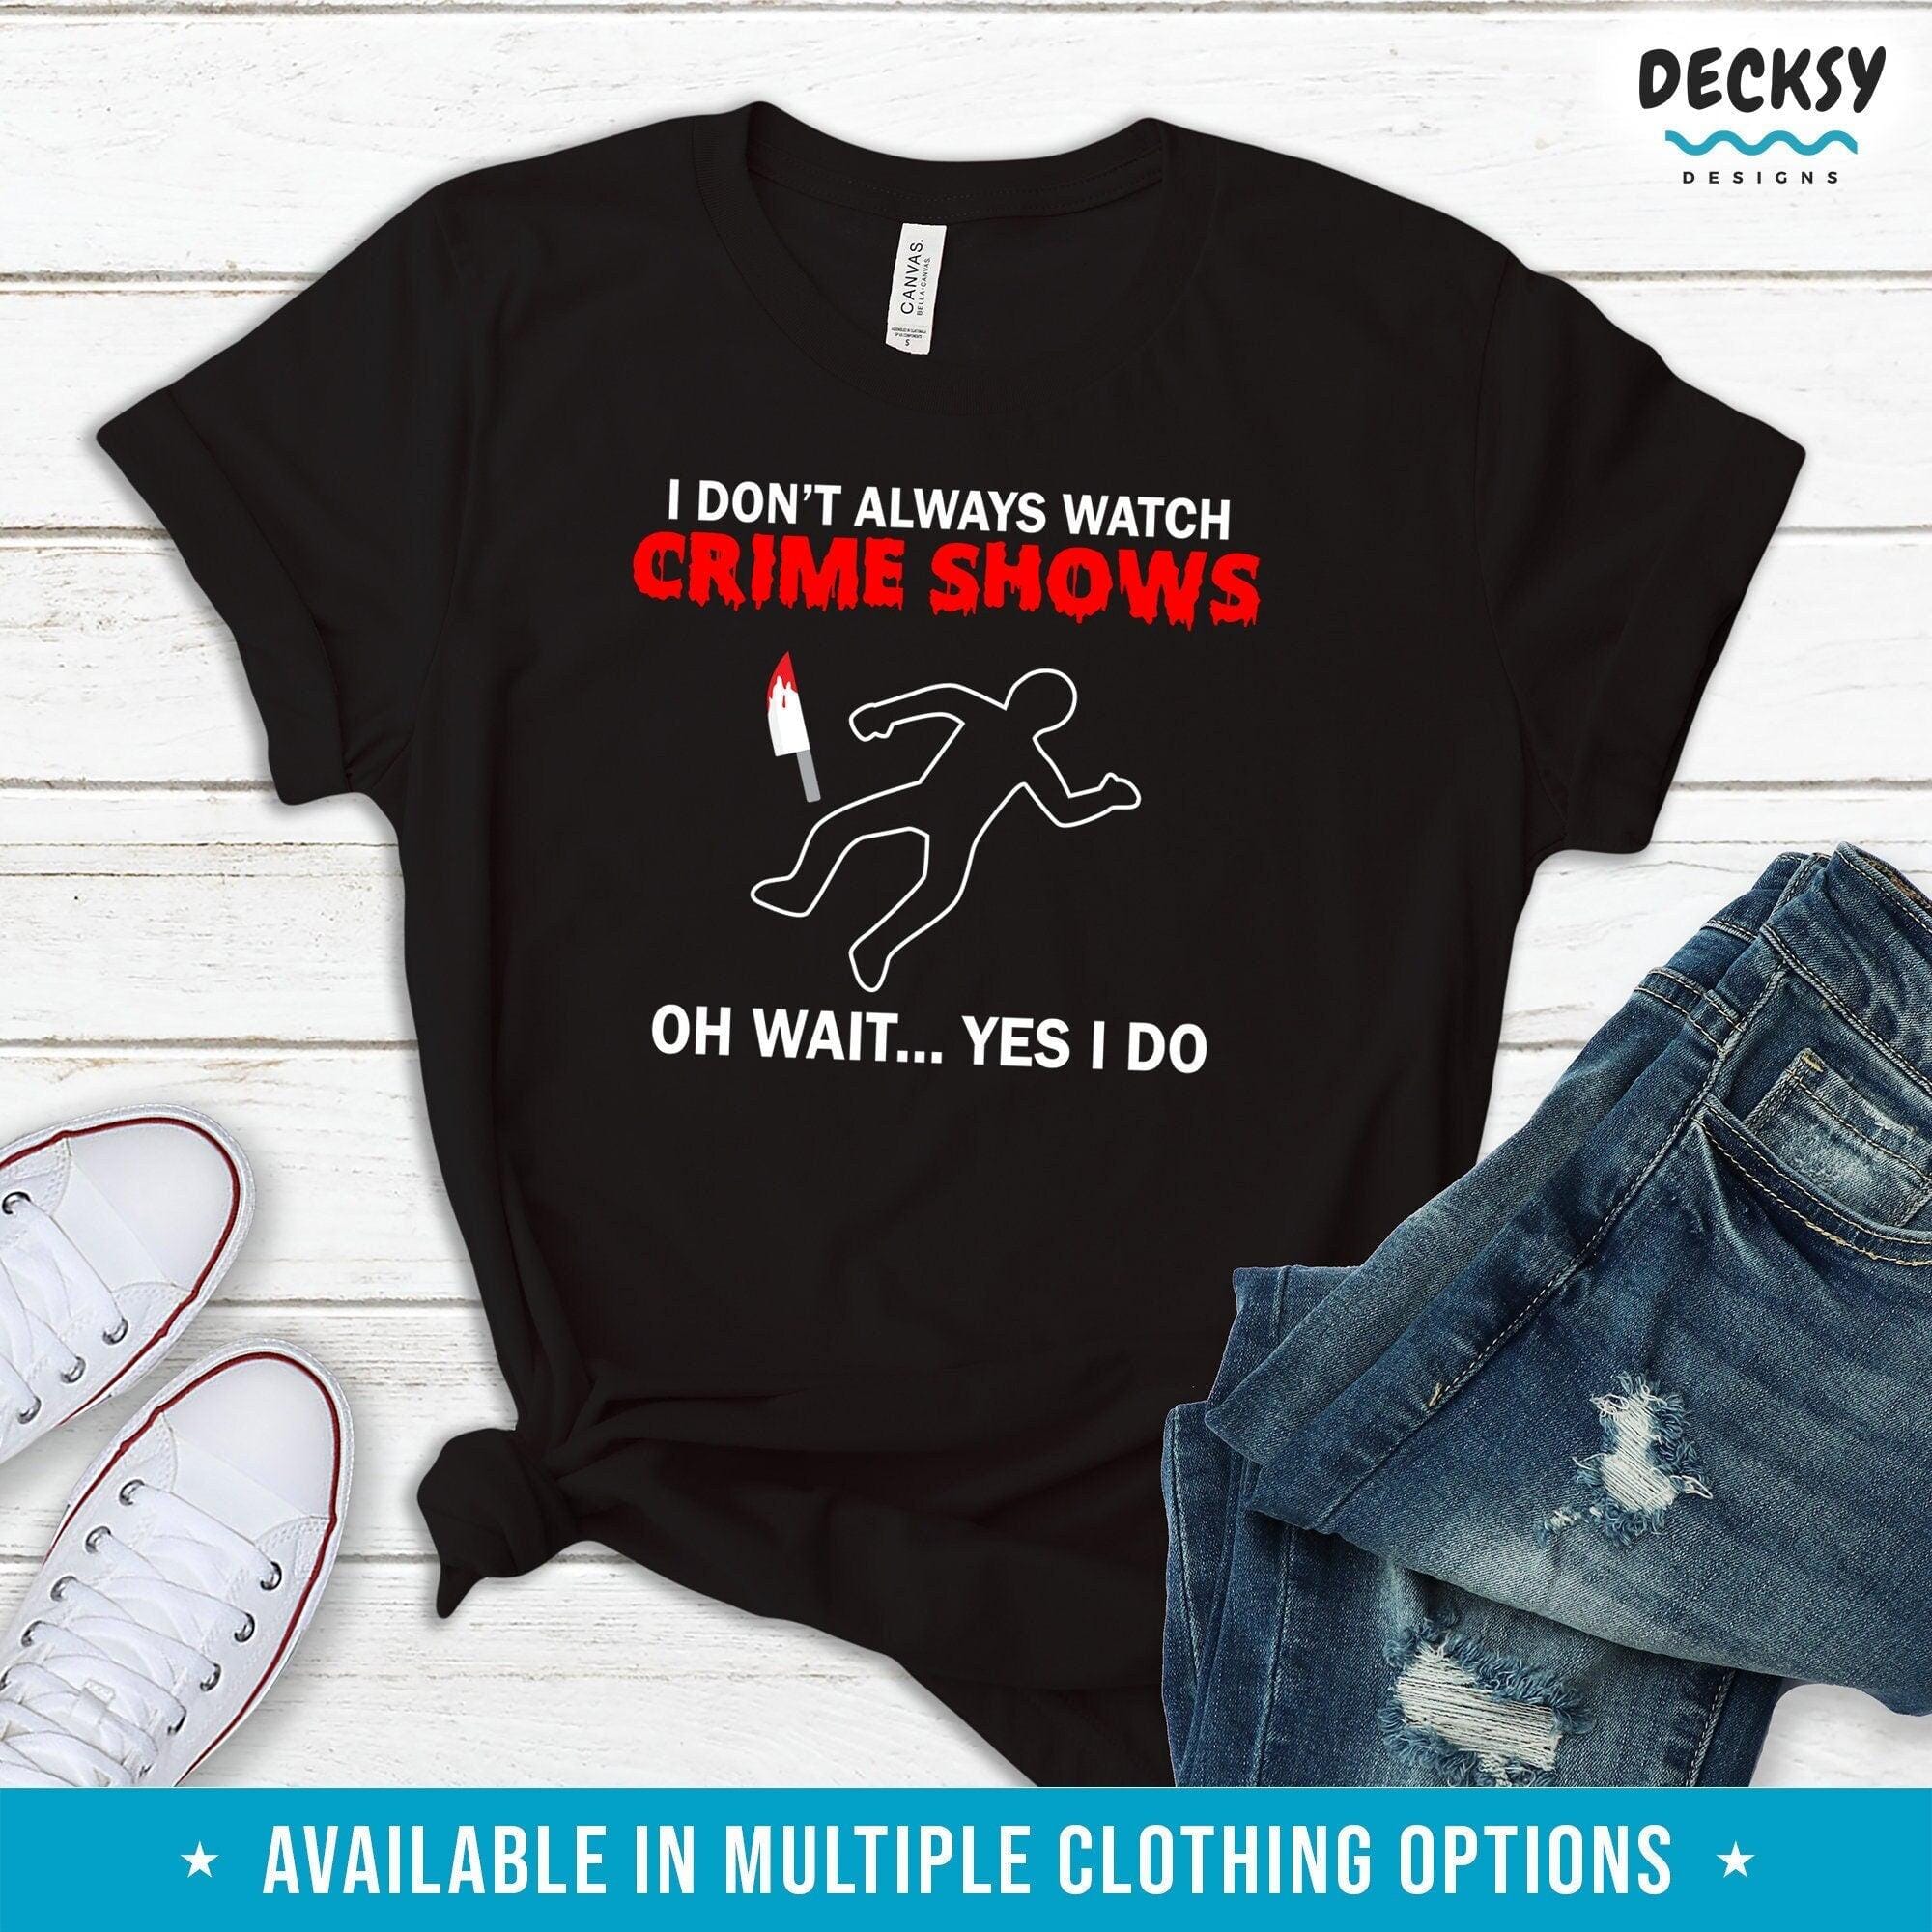 True Crime Shirt, Binge Watching Gift-Clothing:Gender-Neutral Adult Clothing:Tops & Tees:T-shirts:Graphic Tees-DecksyDesigns